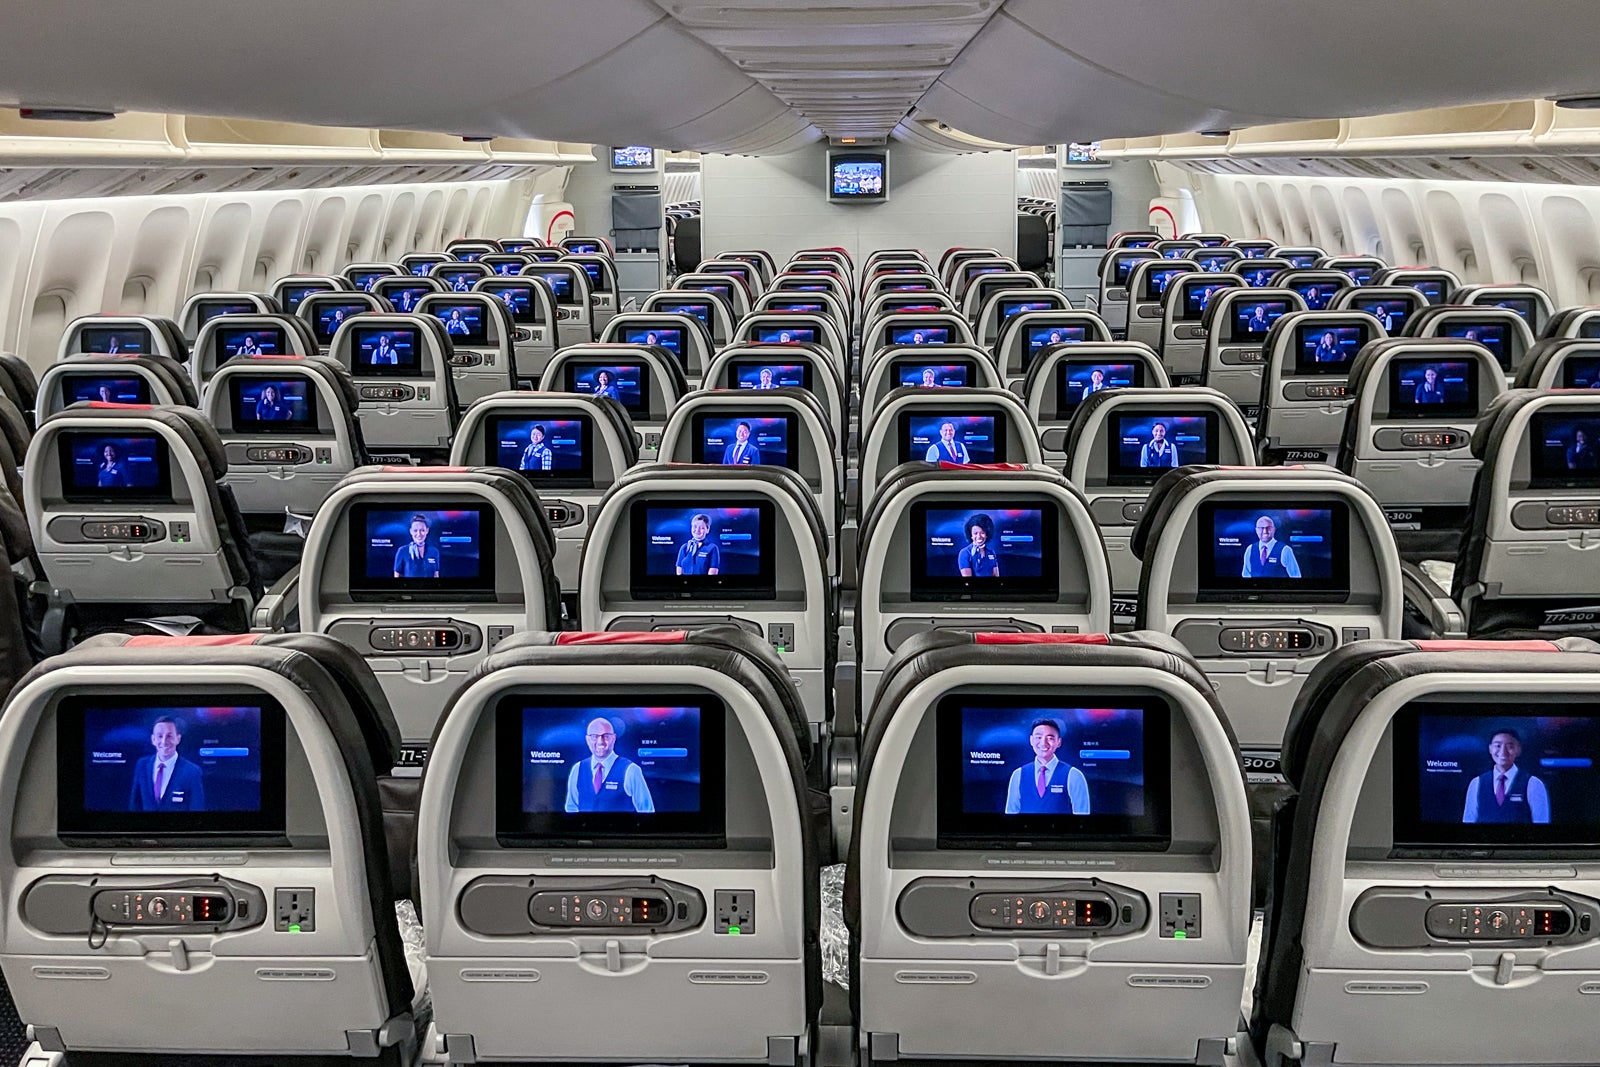 American Airlines Boeing 777-300ER economy cabin